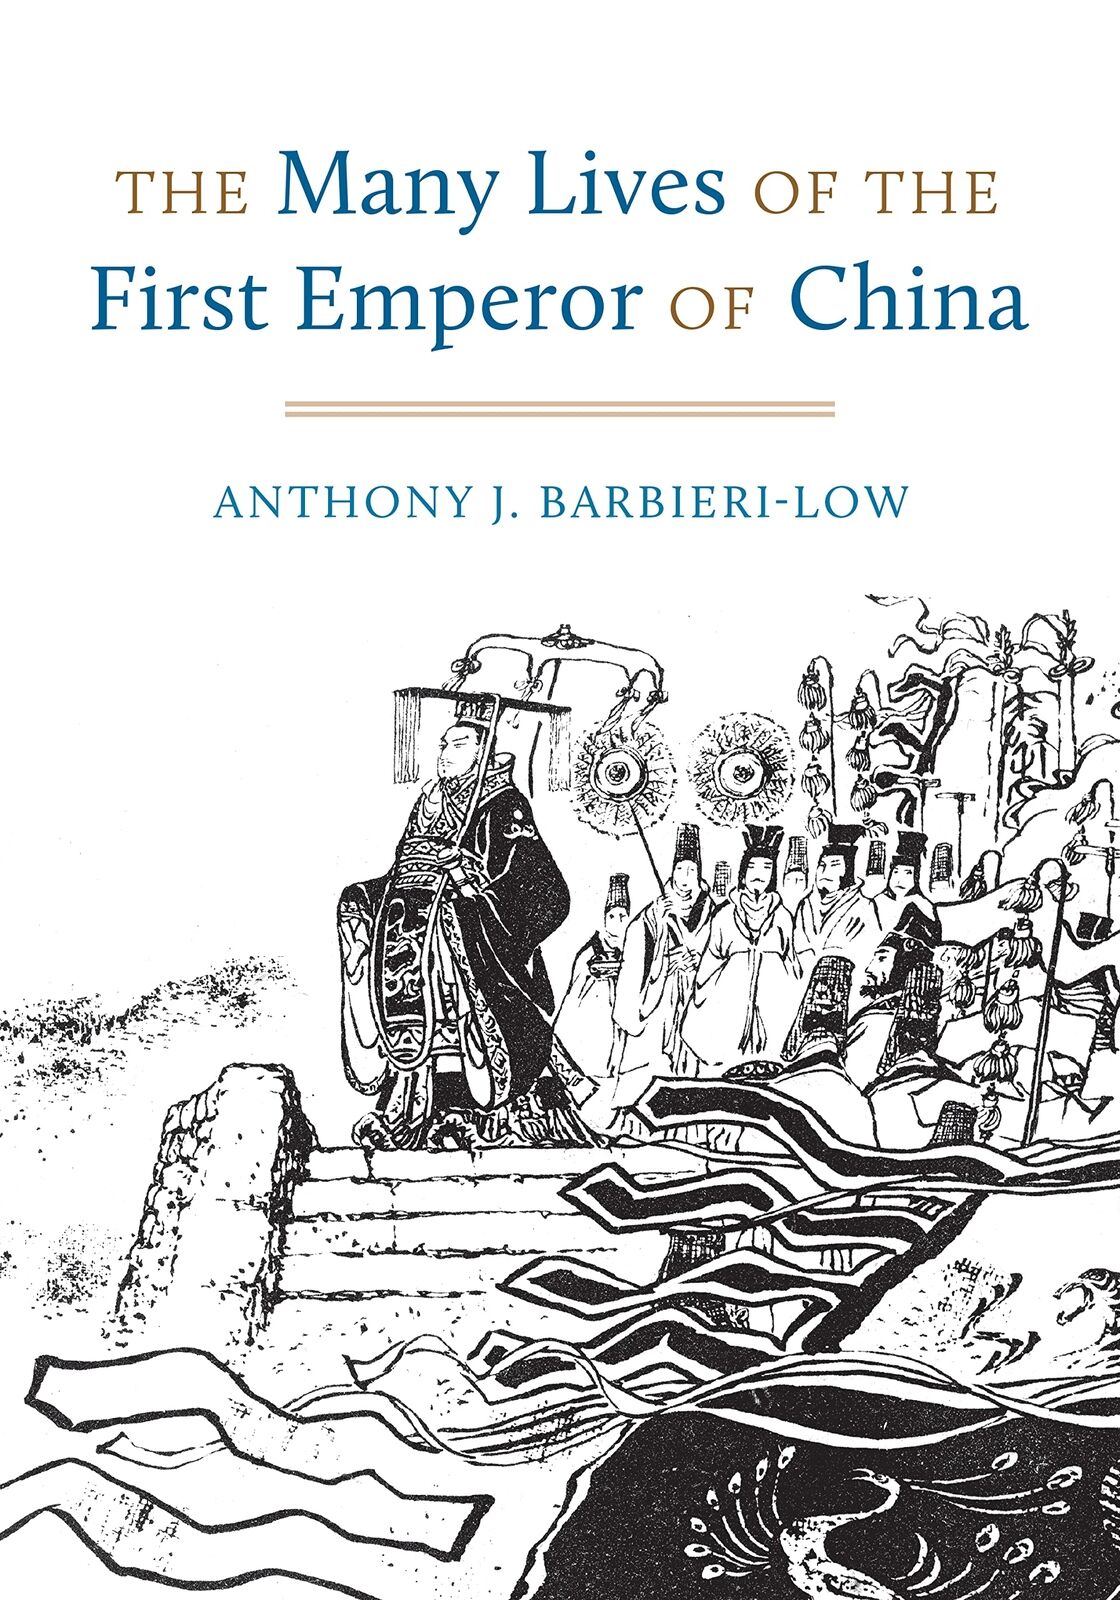 Book Cover for 'The Many Lives of the First Emperor of China' by Anthony J. Barbieri-Low